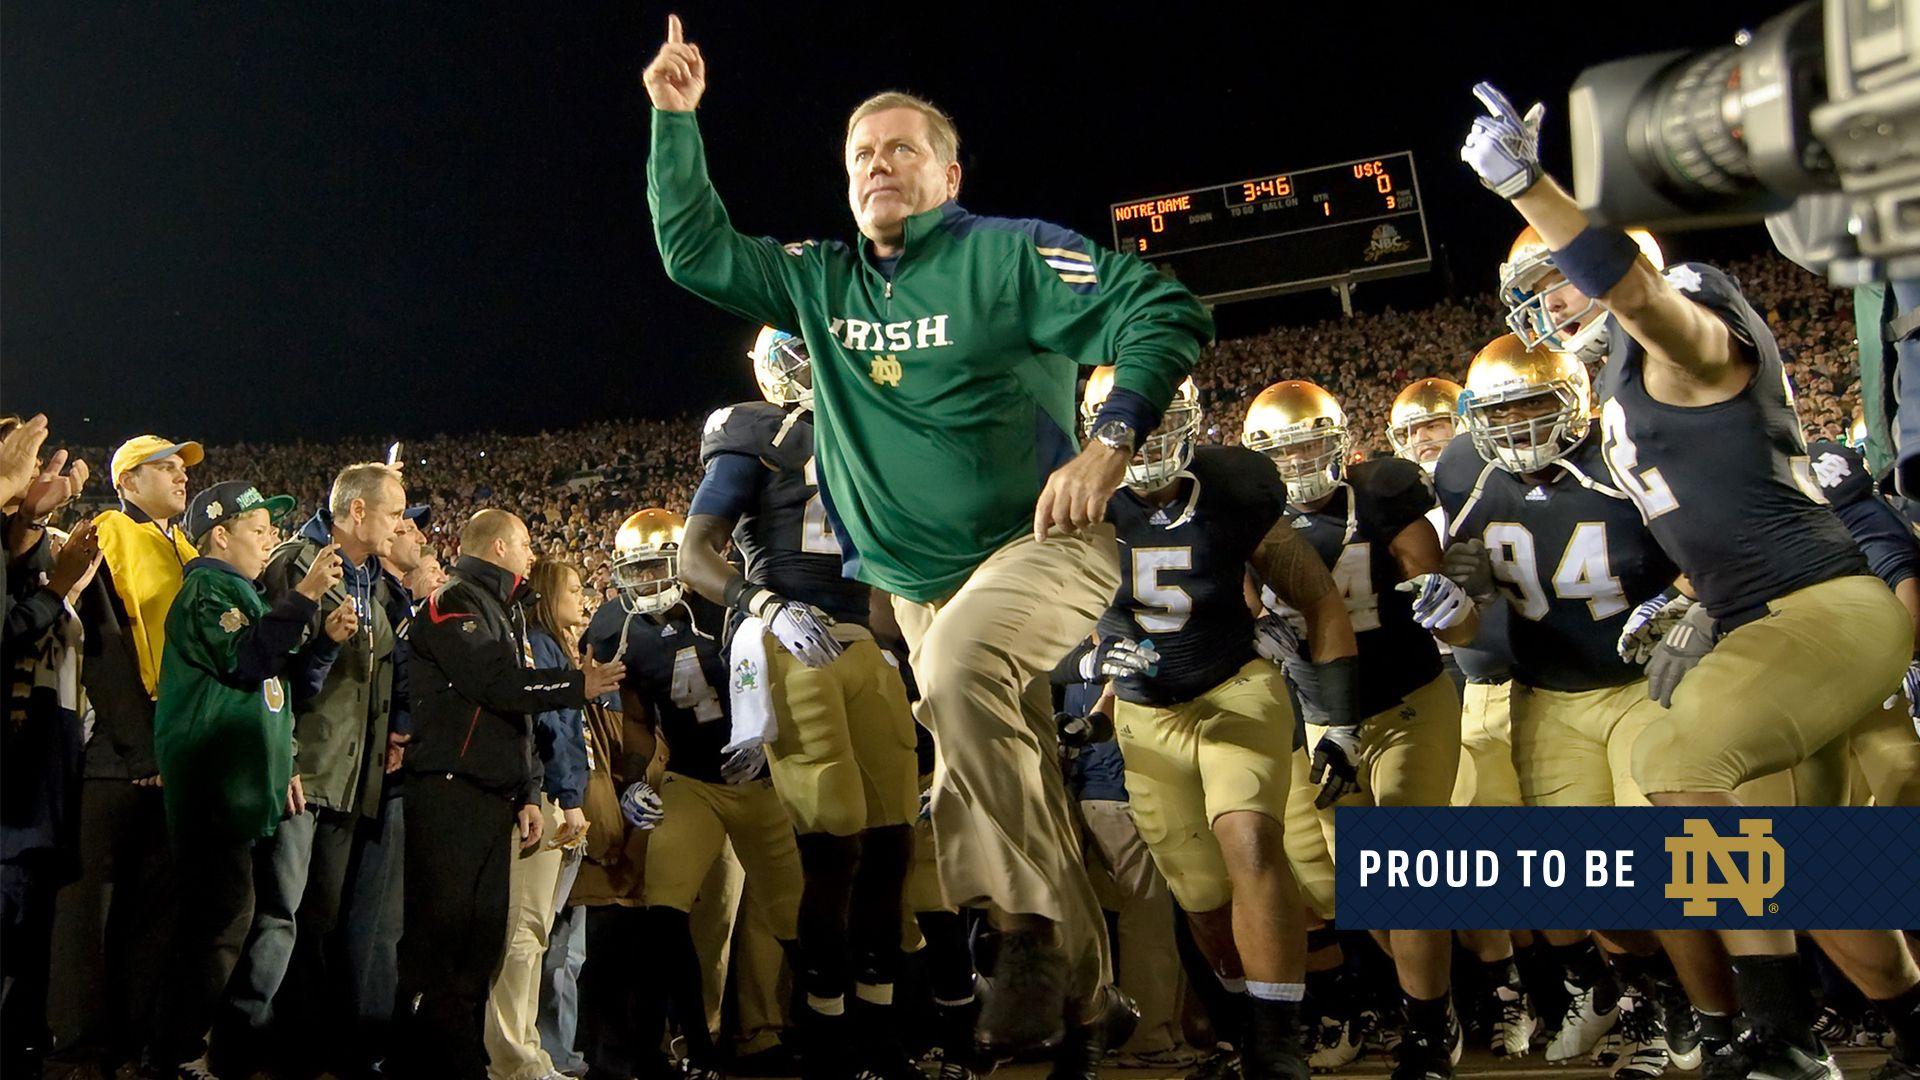 Wallpaper // Proud to Be ND // University of Notre Dame